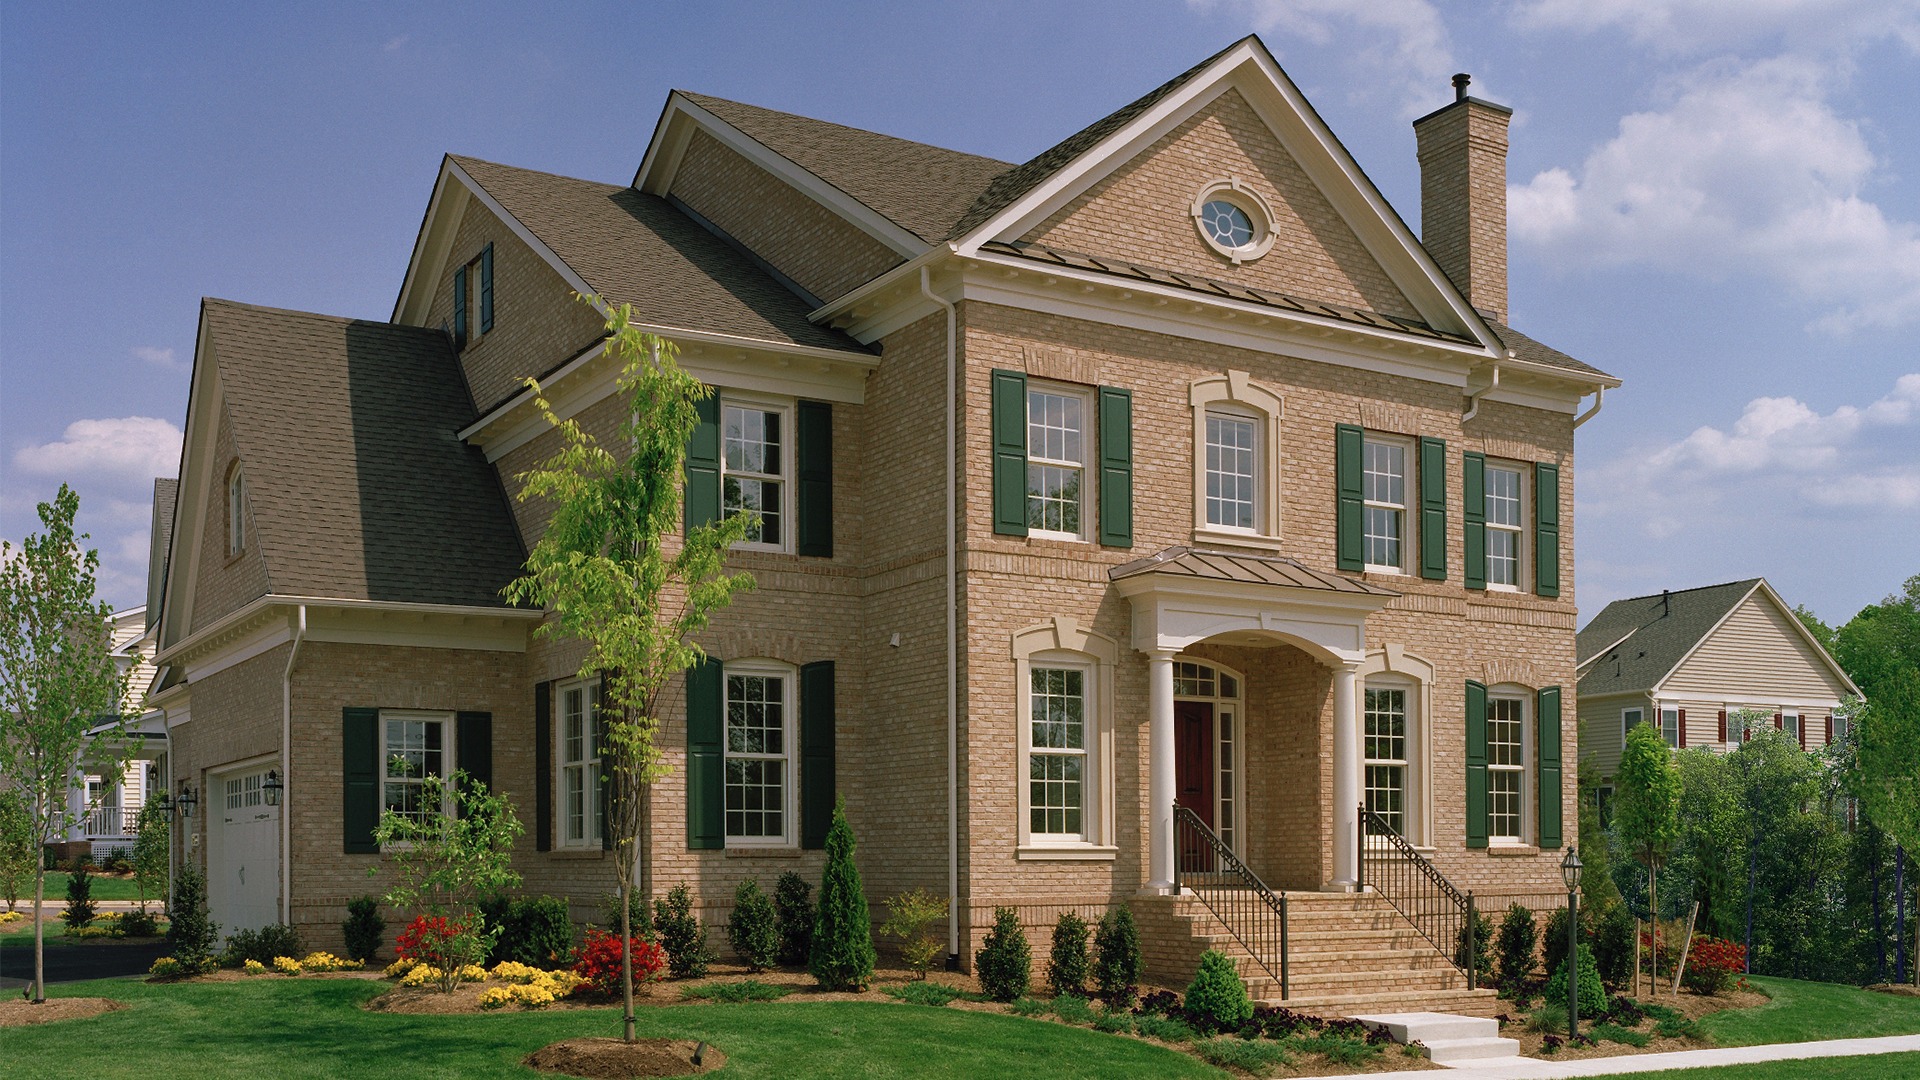 The Front Elevation of the Brentwood model in Brambleton. Some options shown.